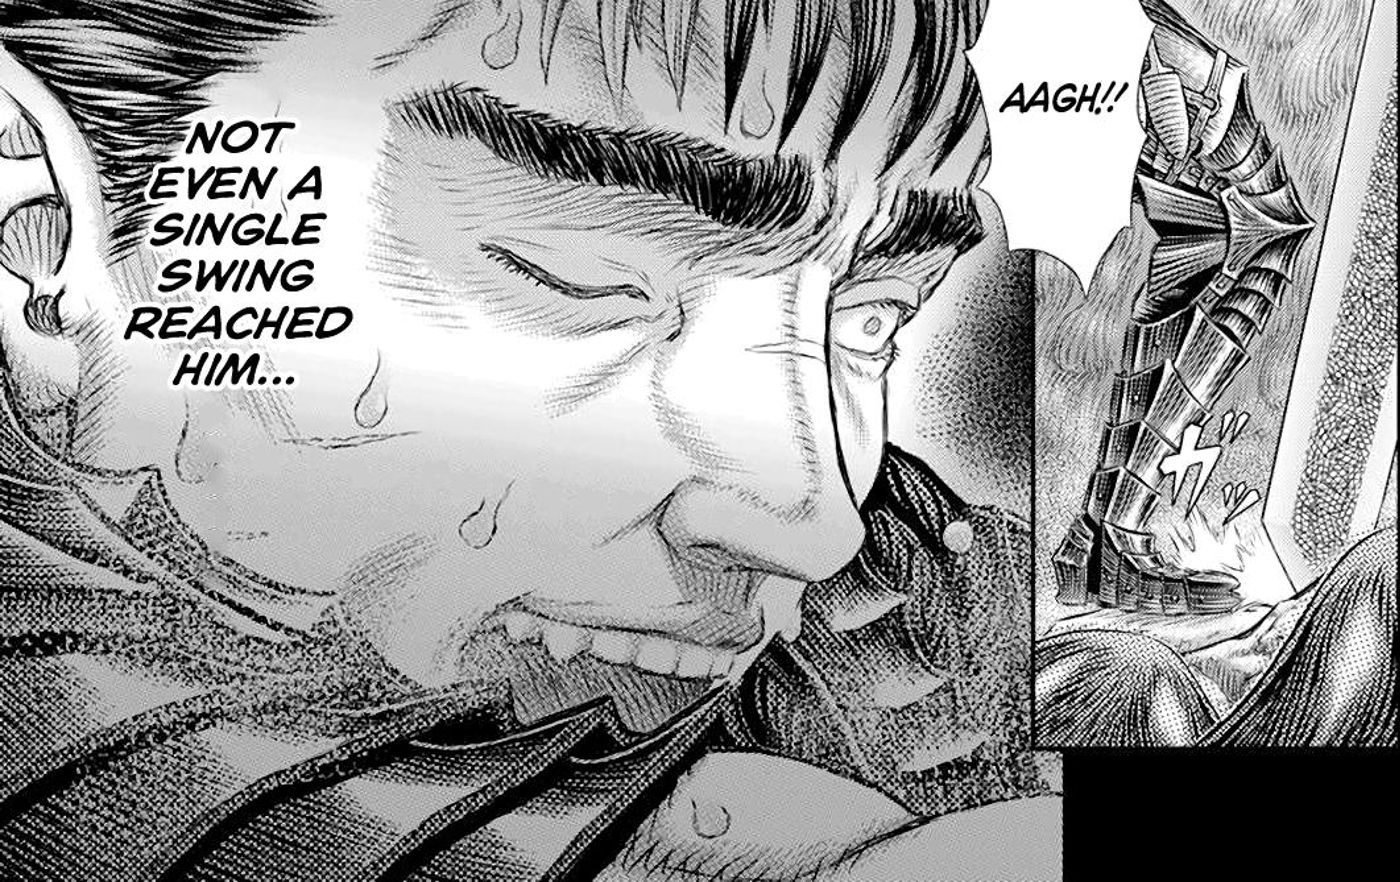 Guts frets how not even a single swing reached Griffith in Berserk chapter 369